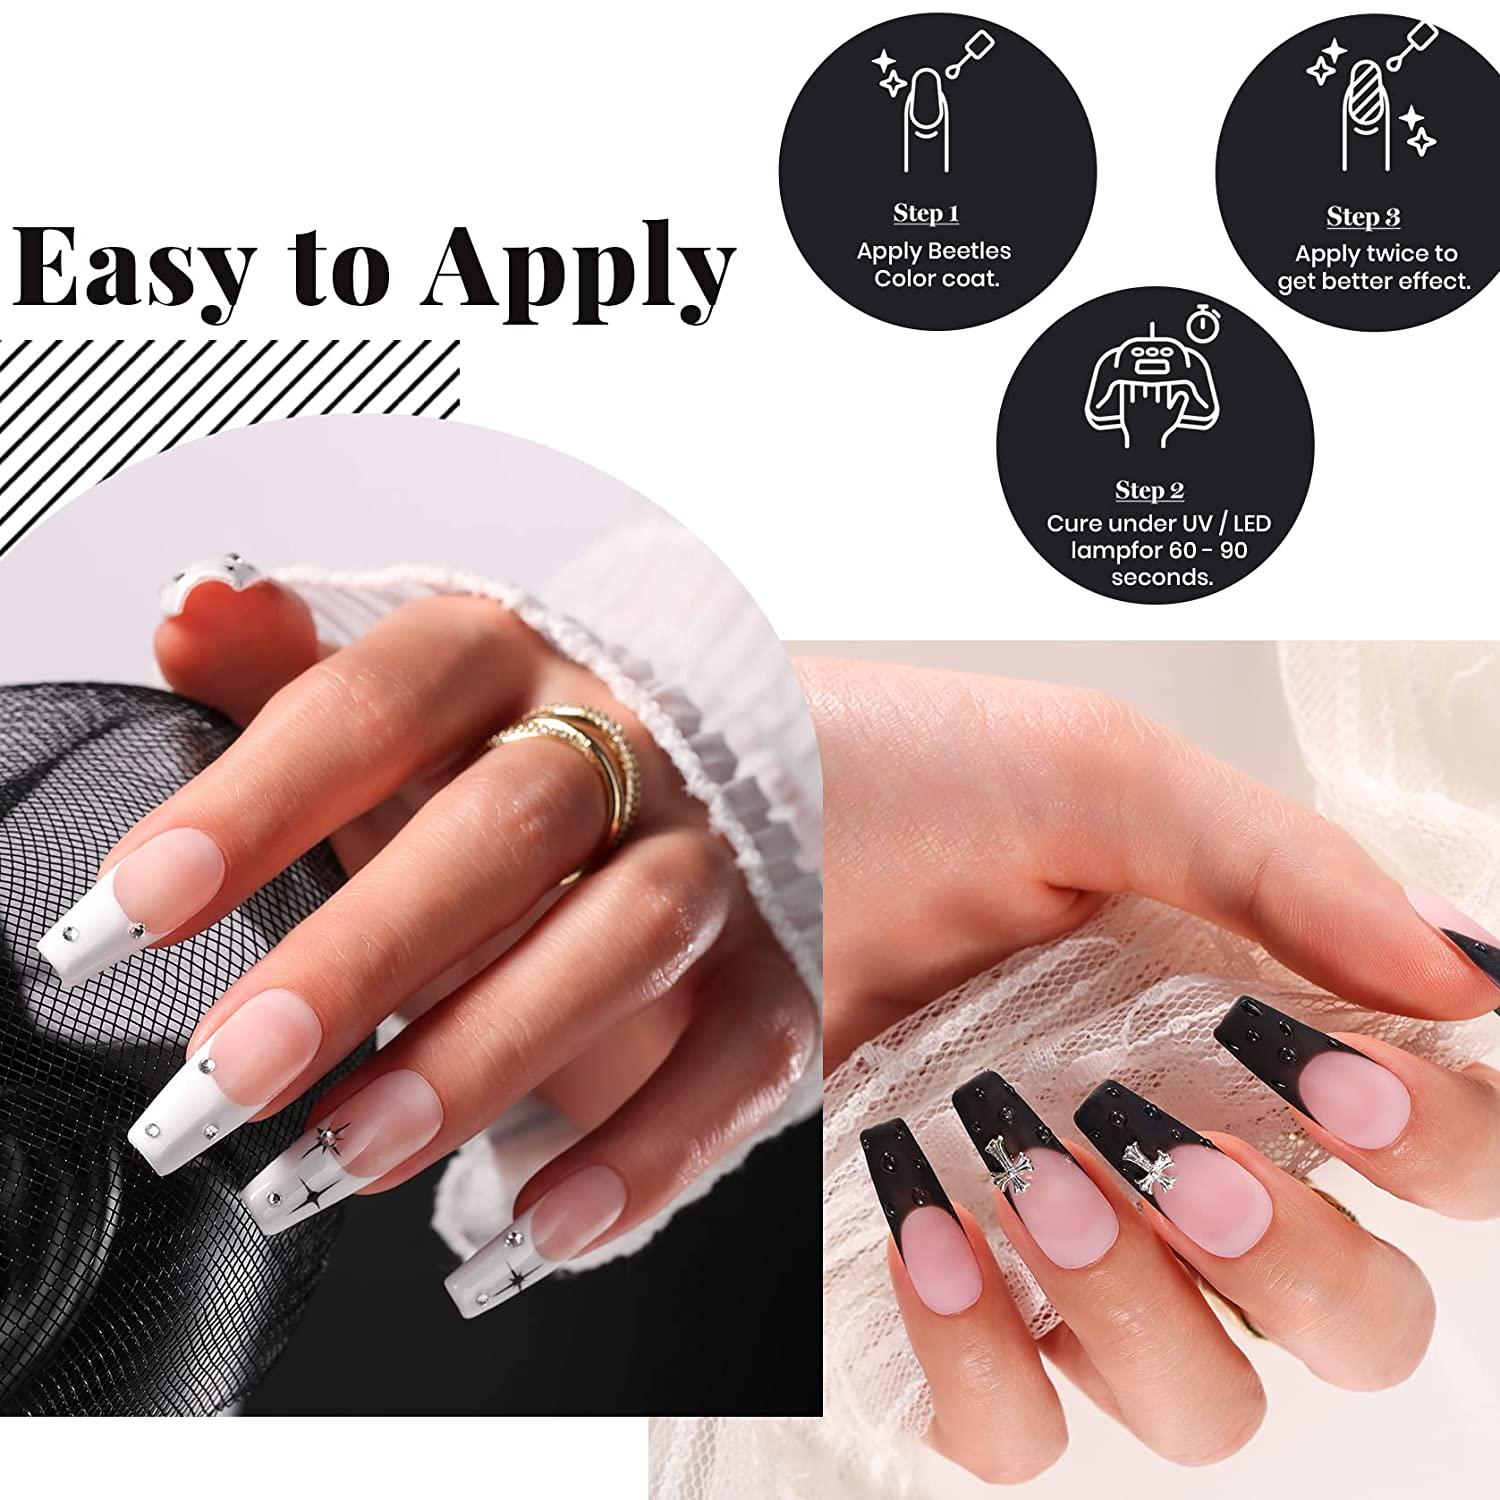 Beetles Gel Polish® - The Best Salon Manicure That You Can Do at Home